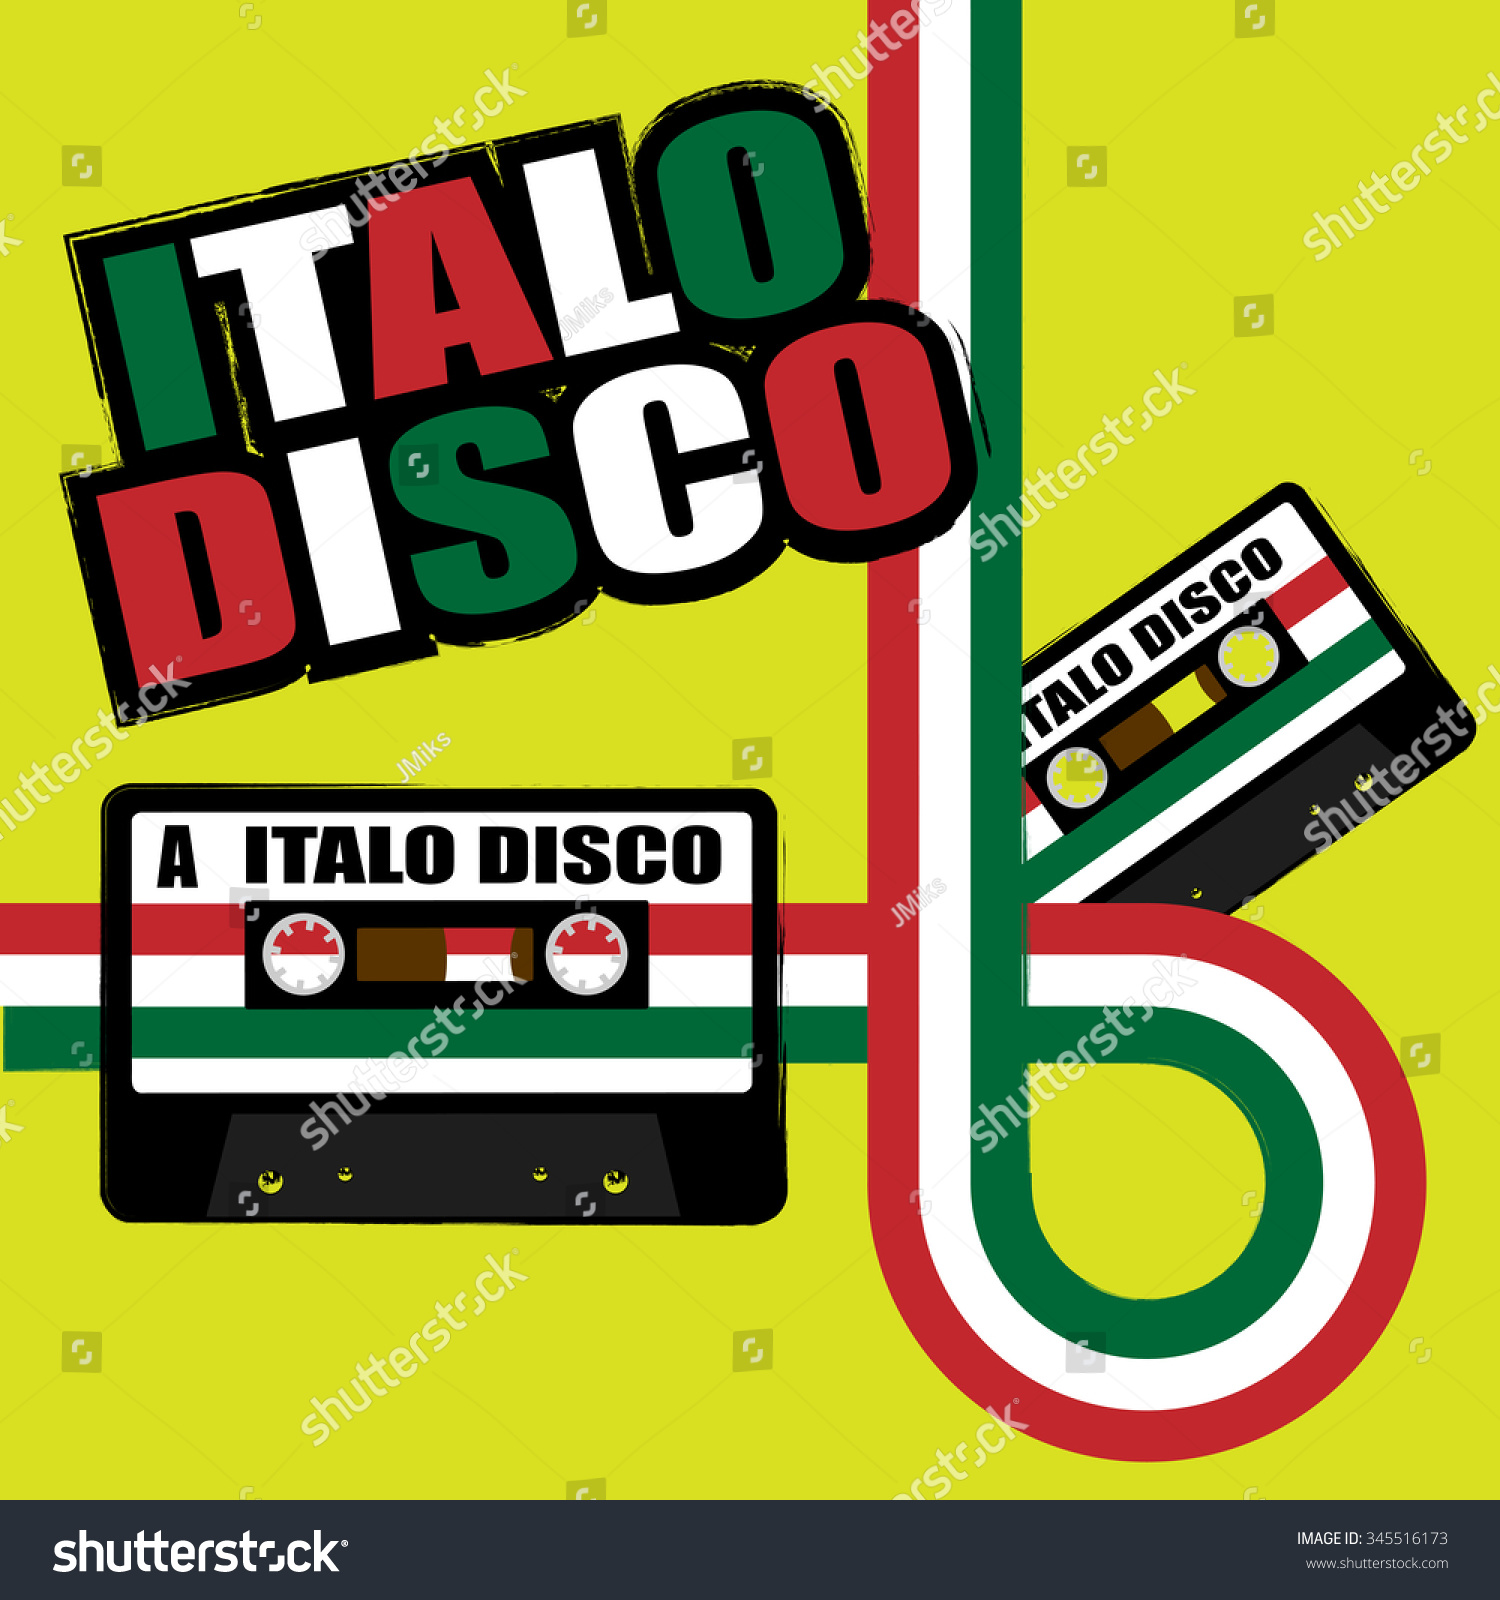 https://image.shutterstock.com/shutterstock/photos/345516173/display_1500/stock-vector-retro-poster-s-party-flyer-with-audio-cassette-tape-345516173.jpg